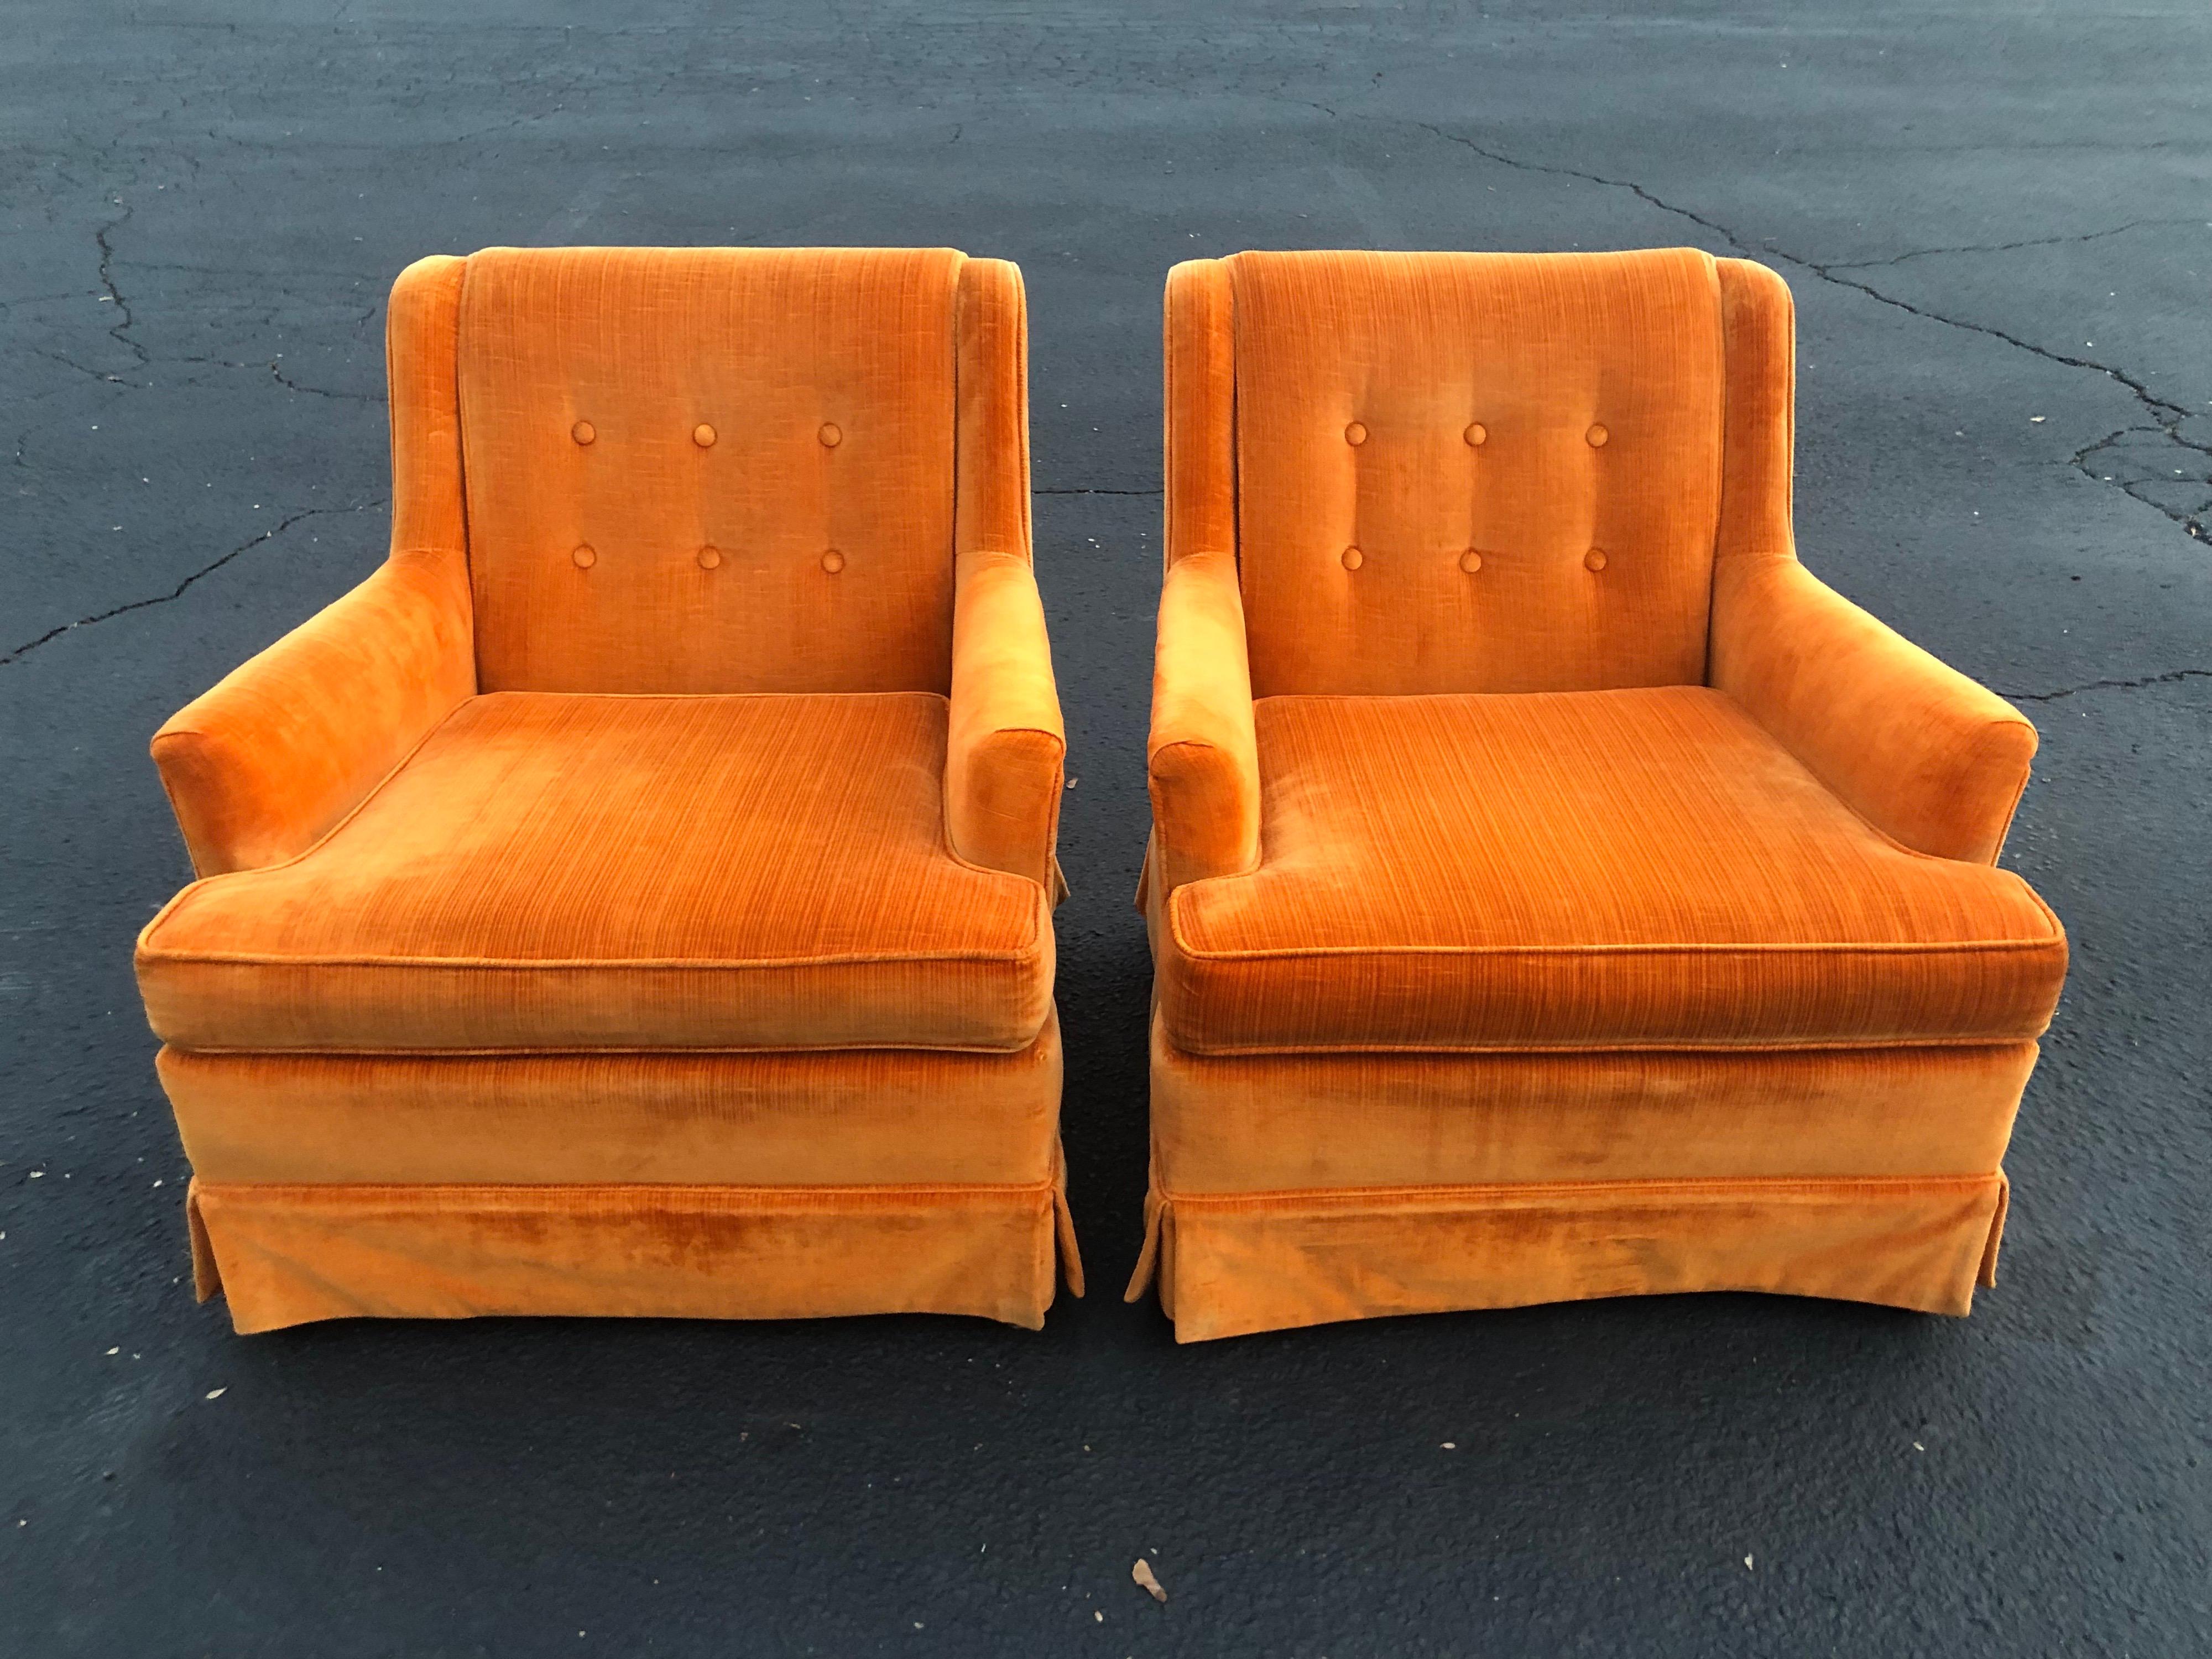 Pair of orange velvet chairs by Woodmark Originals. The company is based out of High Point North Carolina. These chairs must have been covered in plastic most of their life as there is little wear to the velvet for its age. Fun bright chairs that